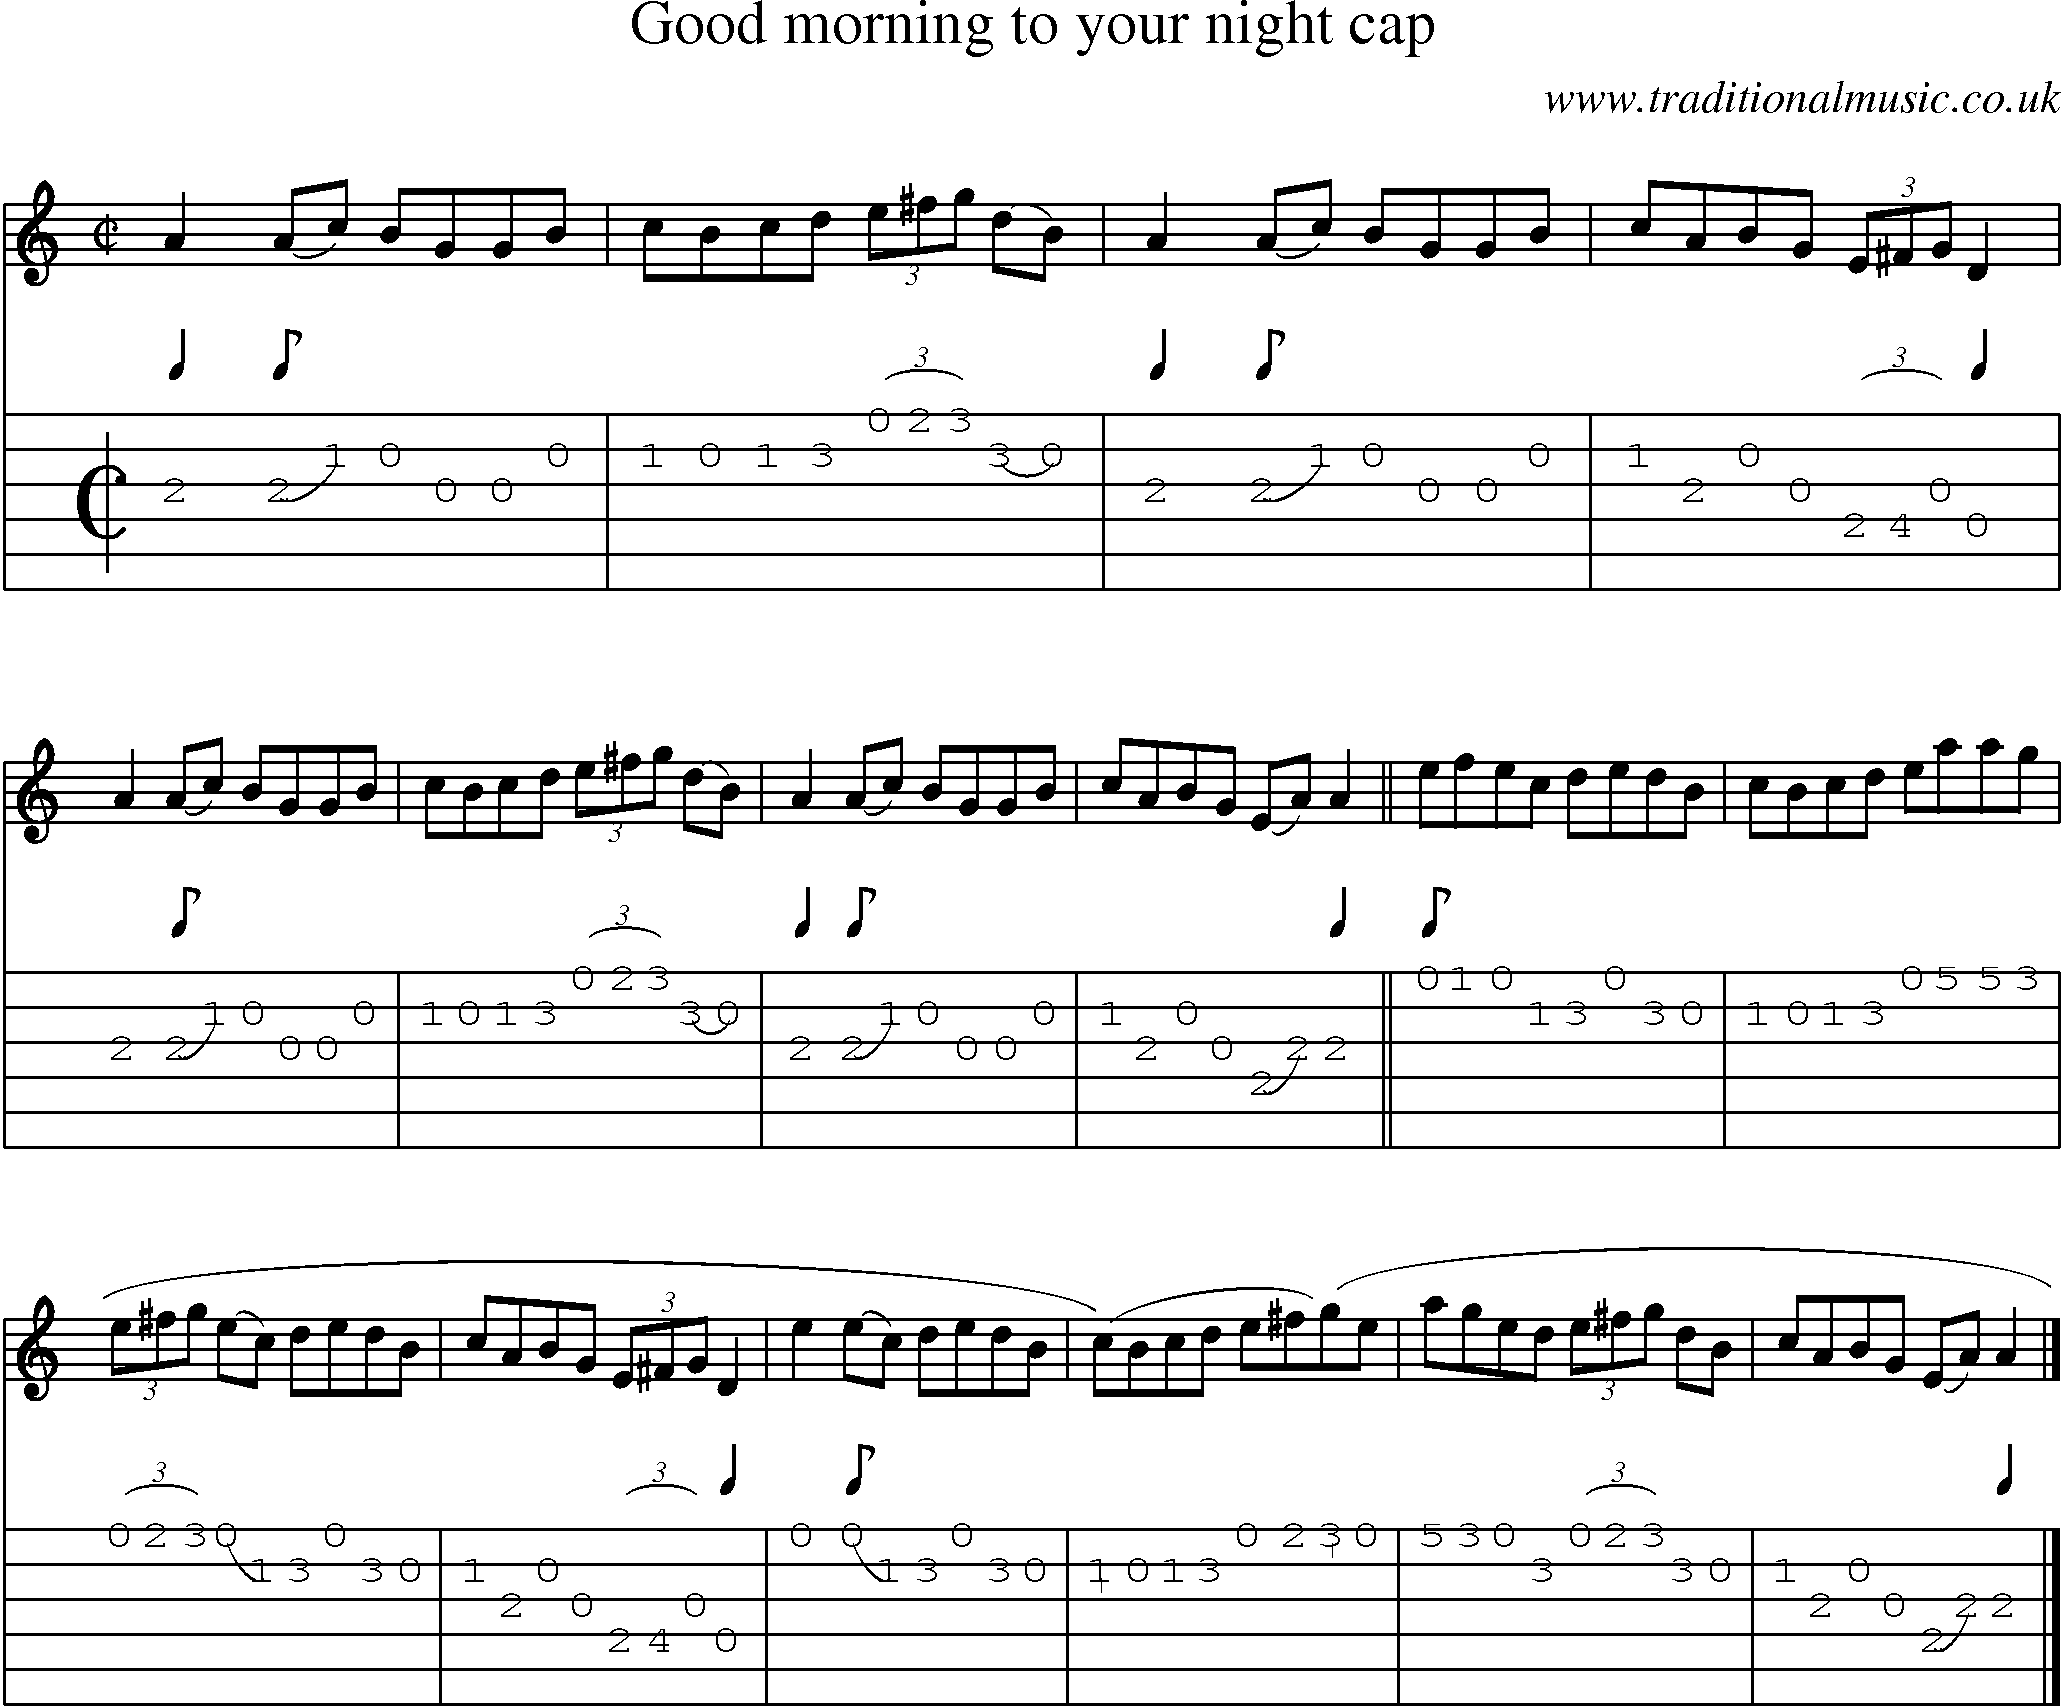 Music Score and Guitar Tabs for Good Morning To Your Night Cap